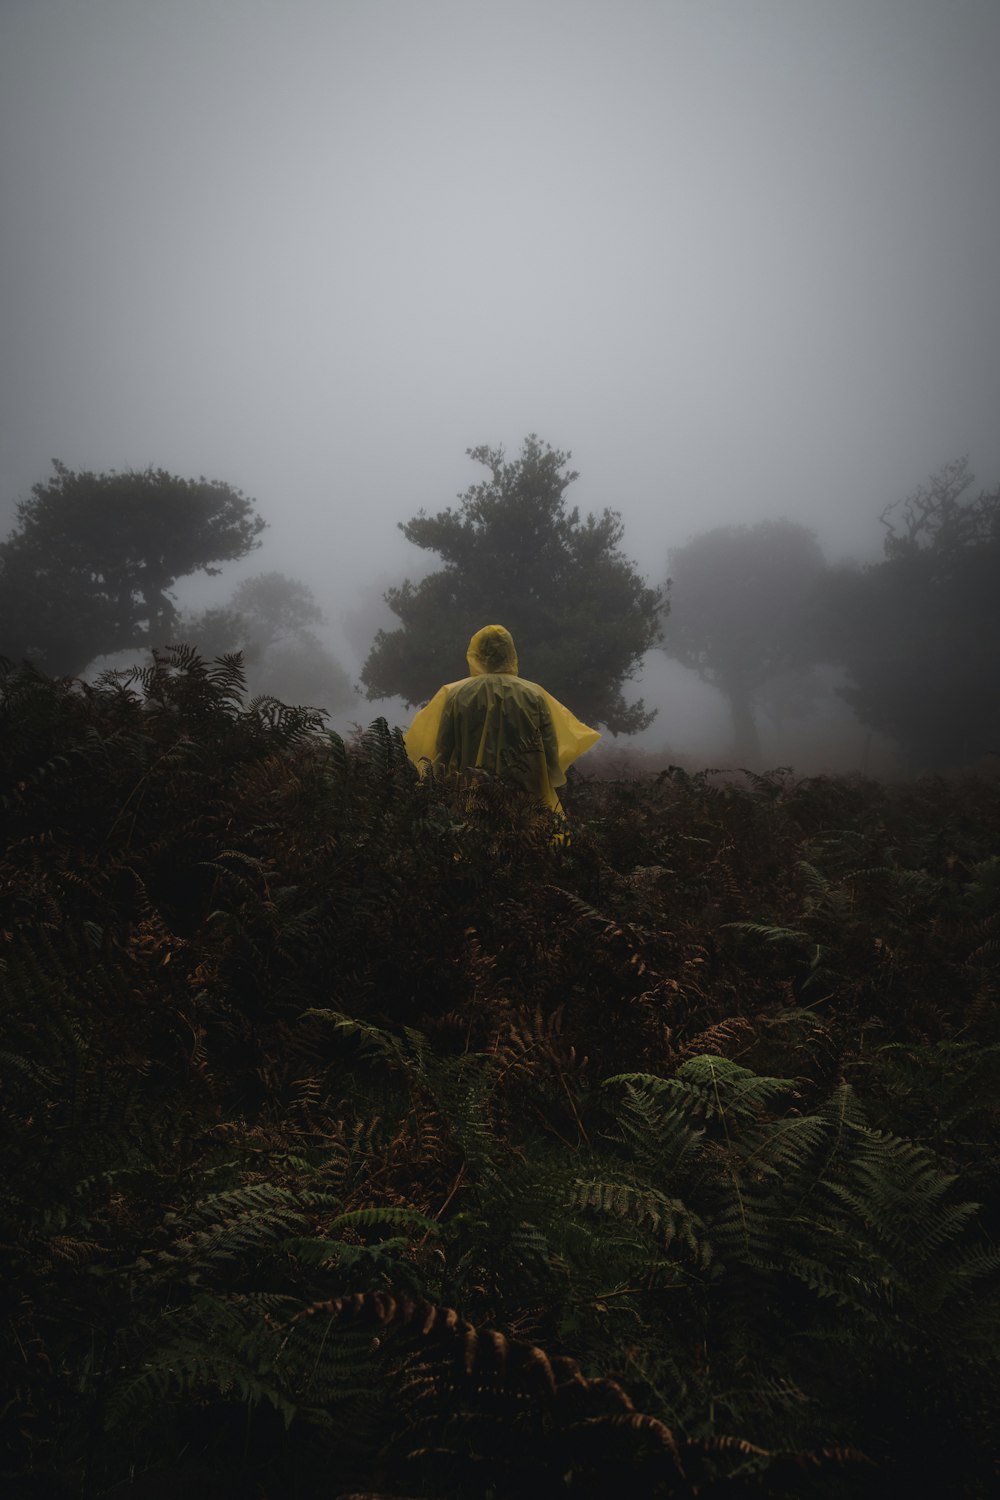 a person in a yellow raincoat walking through a foggy forest